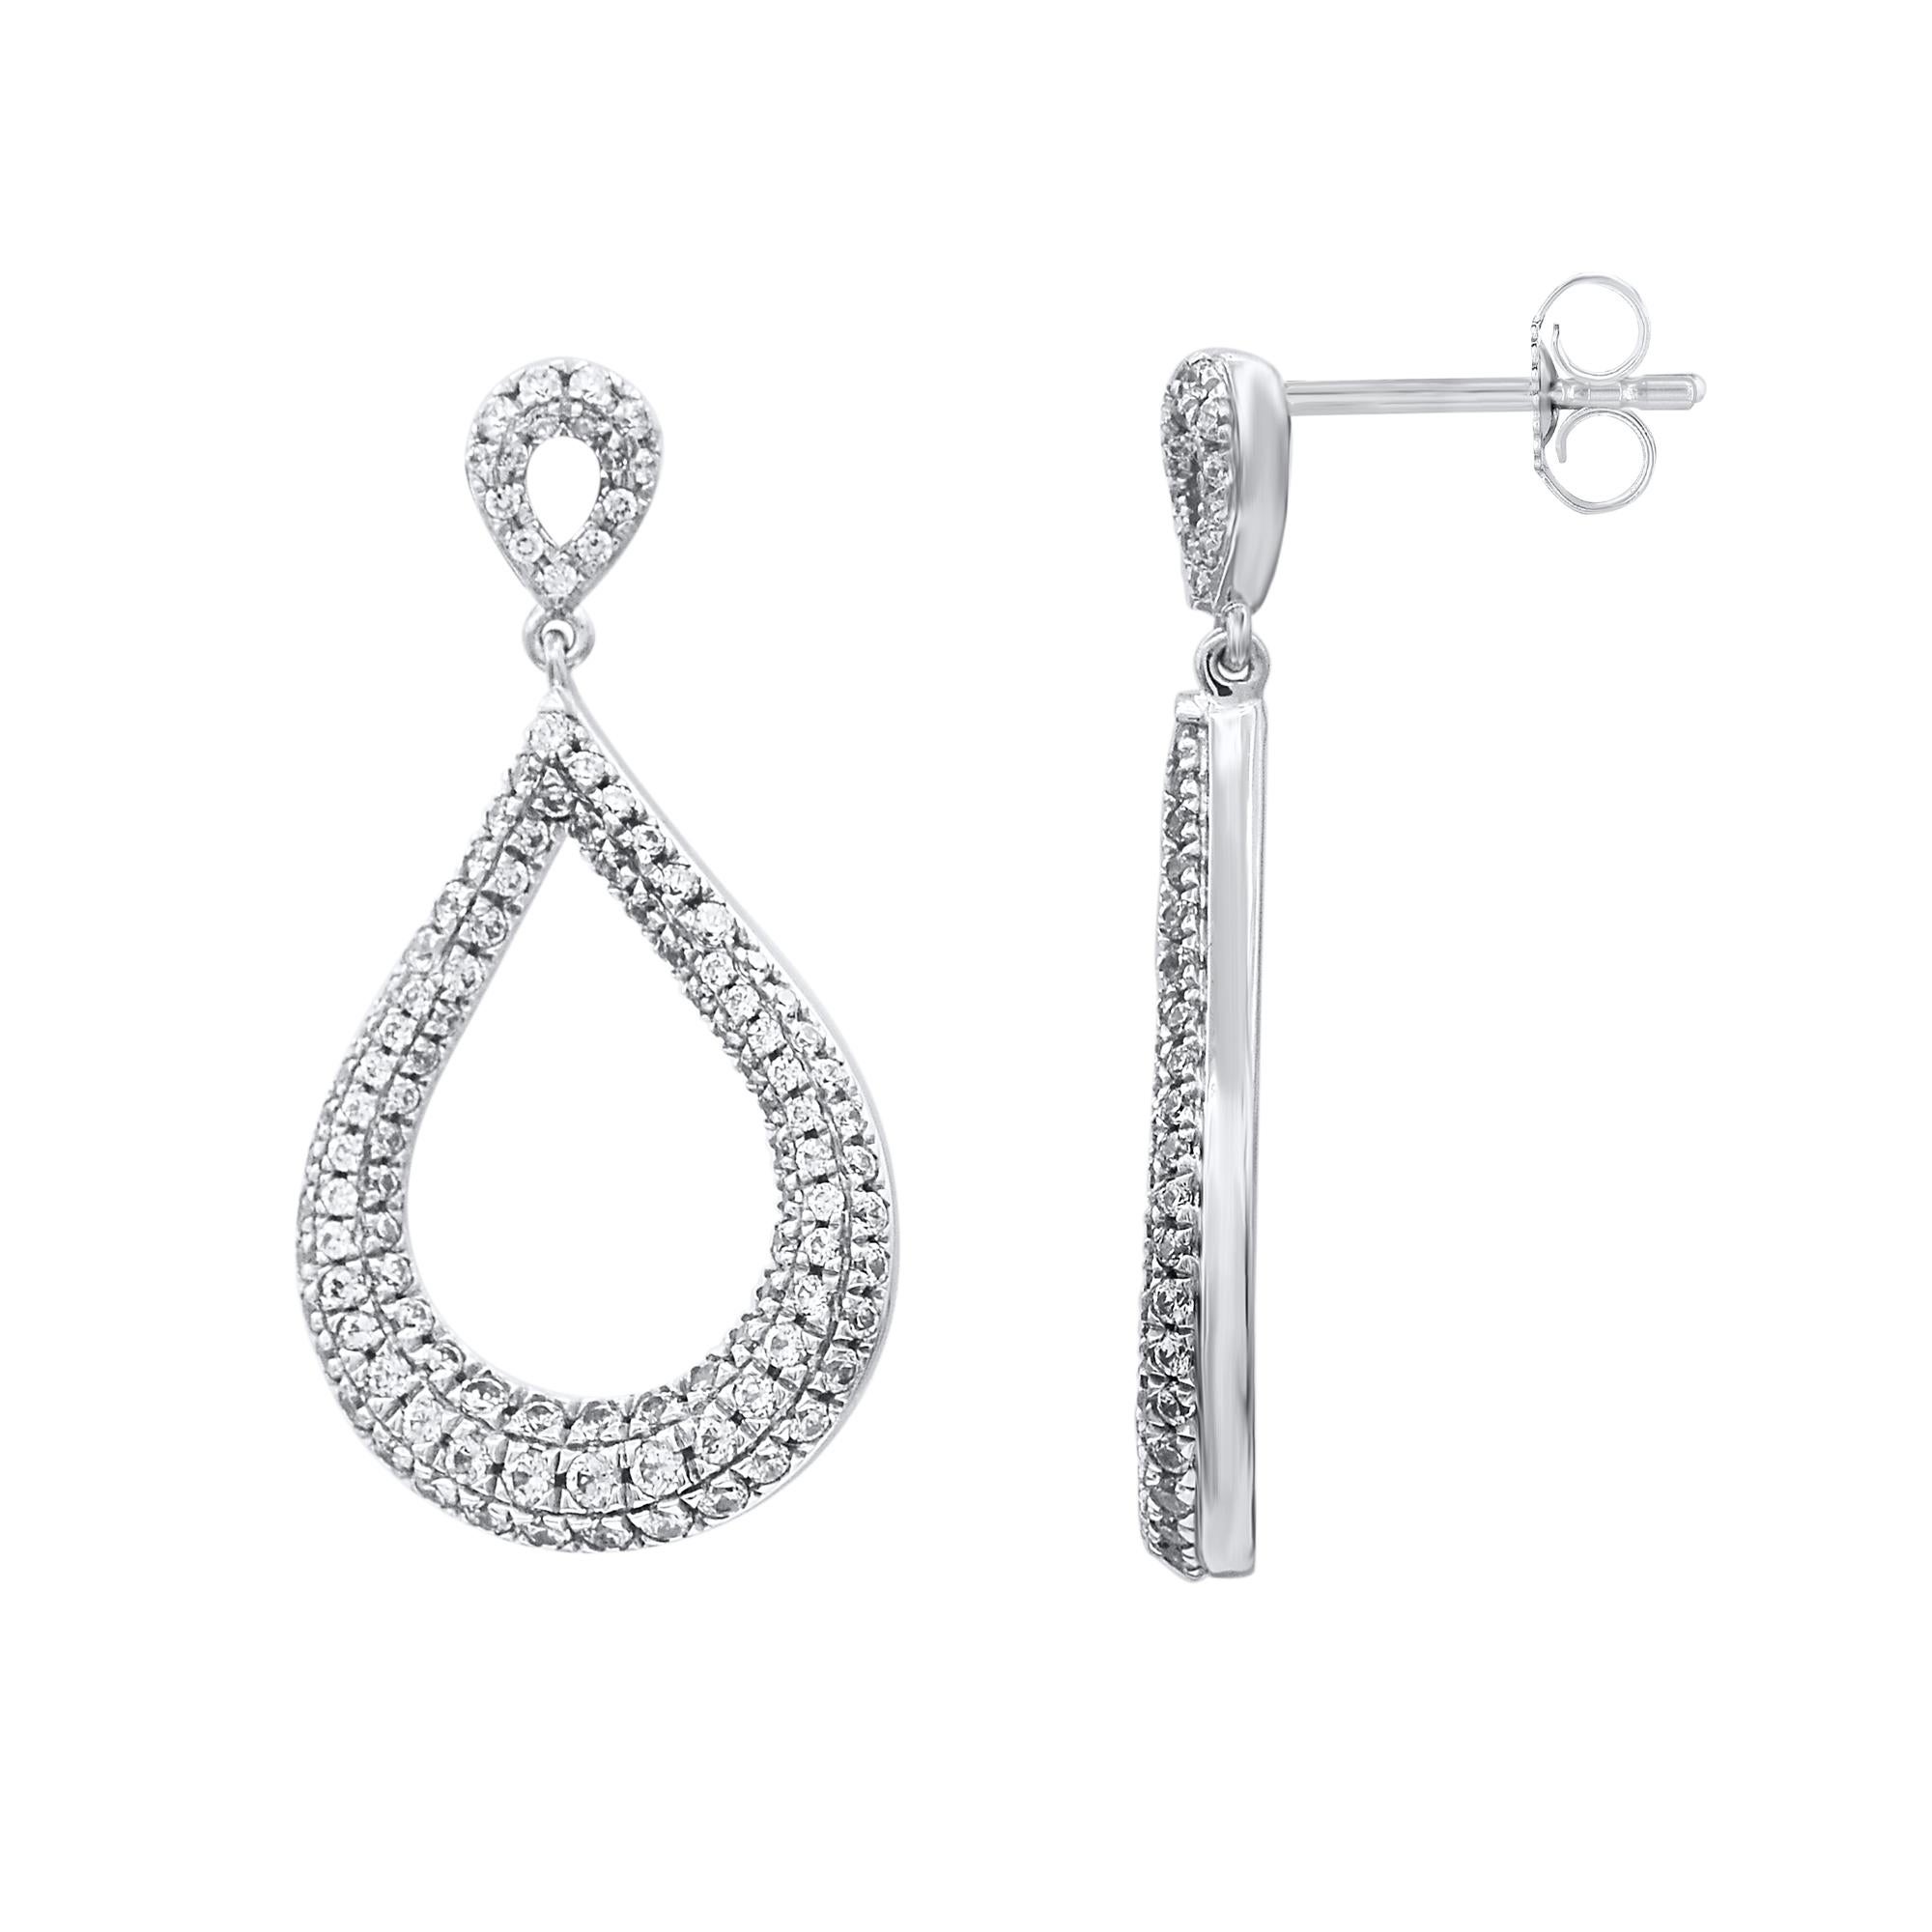 Update your evening look with these playful diamond drop earrings. These beautiful 18 karat white gold earrings are studded with 228 brilliant cut and single cut natural diamonds in prong settings and earring secure with post back. Total diamond